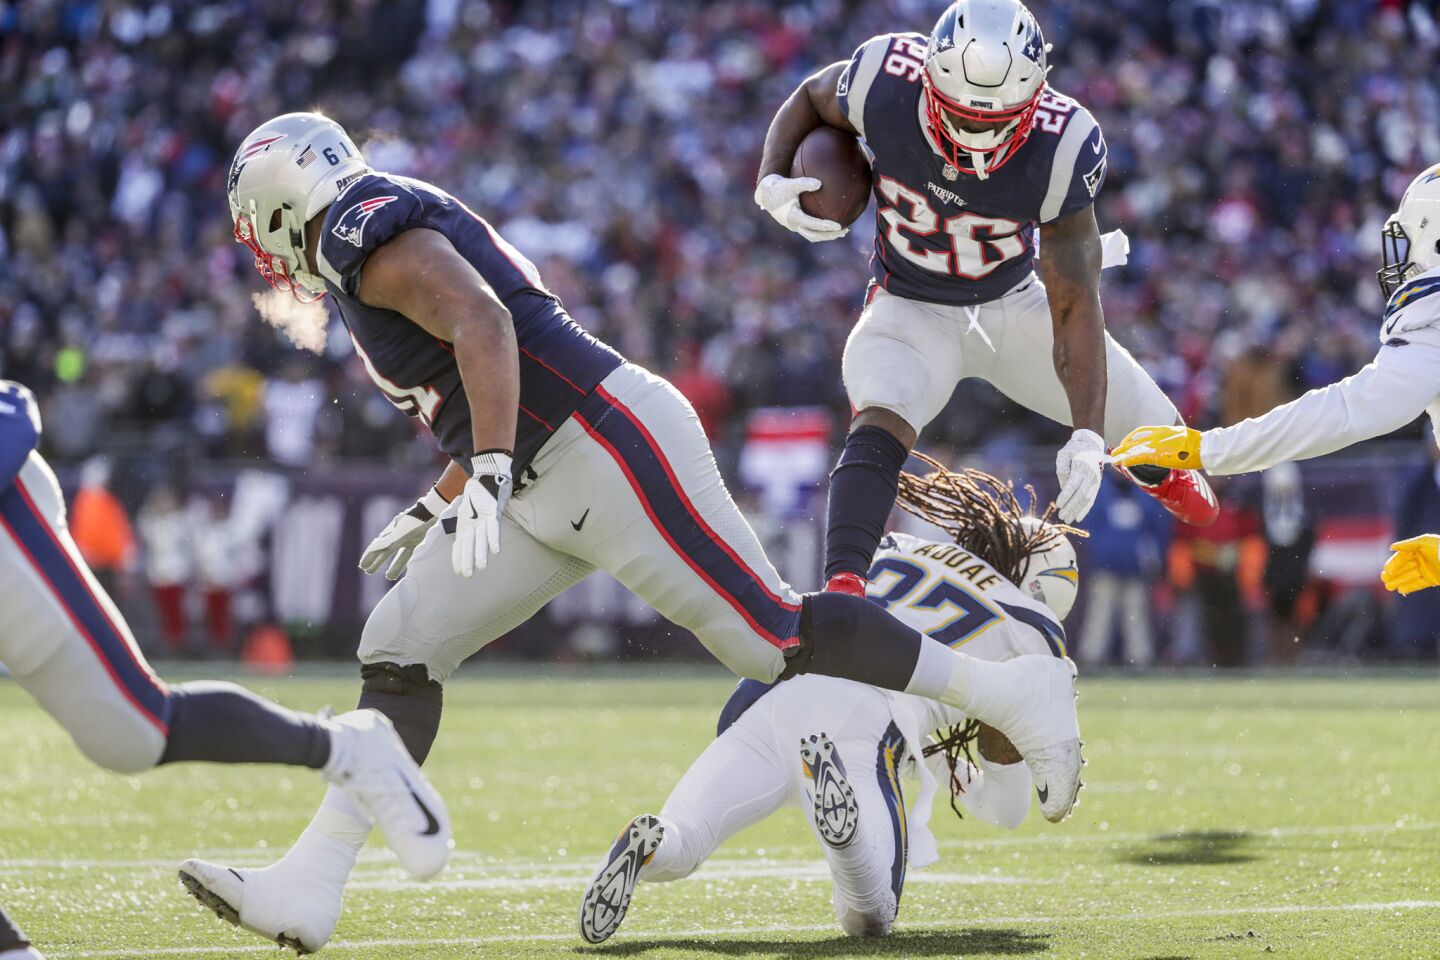 New England Patriots running back Sony Michel leaps over Chargers safety Jahleel Addae on a first quarter run in the NFL AFC Divisional Playoff at Gillette Stadium on Sunday.